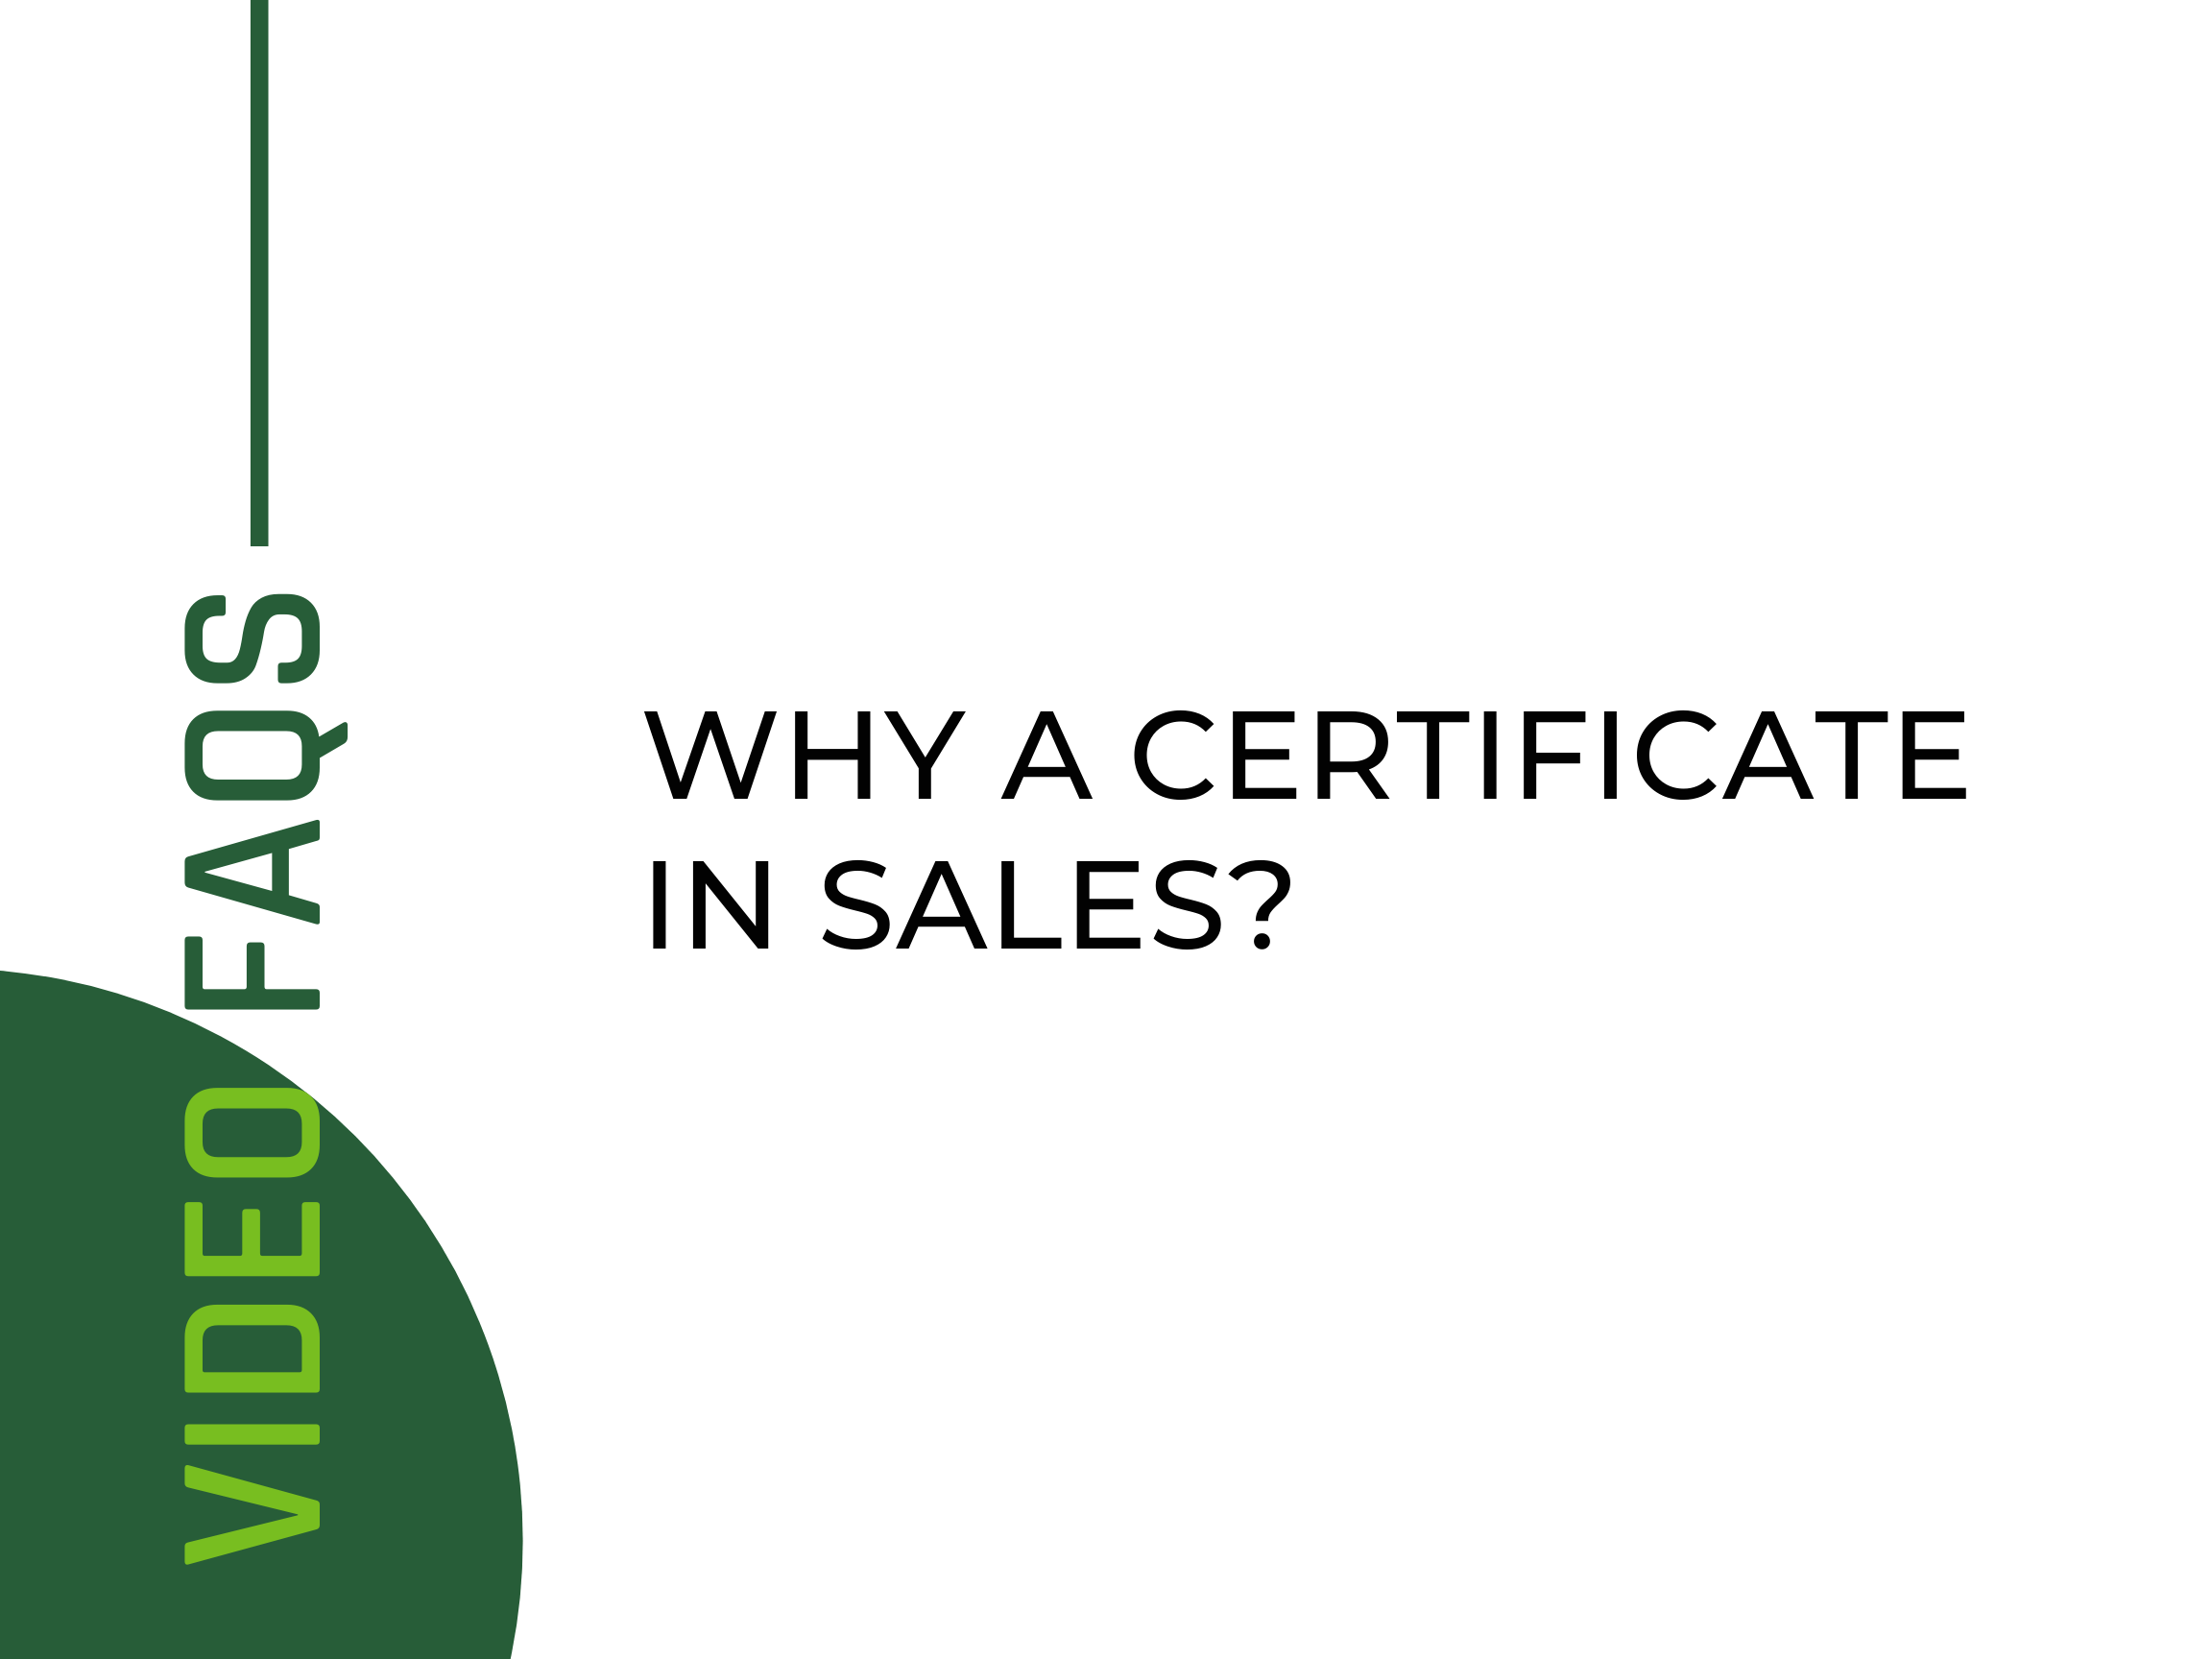 Why a certificate in sales?